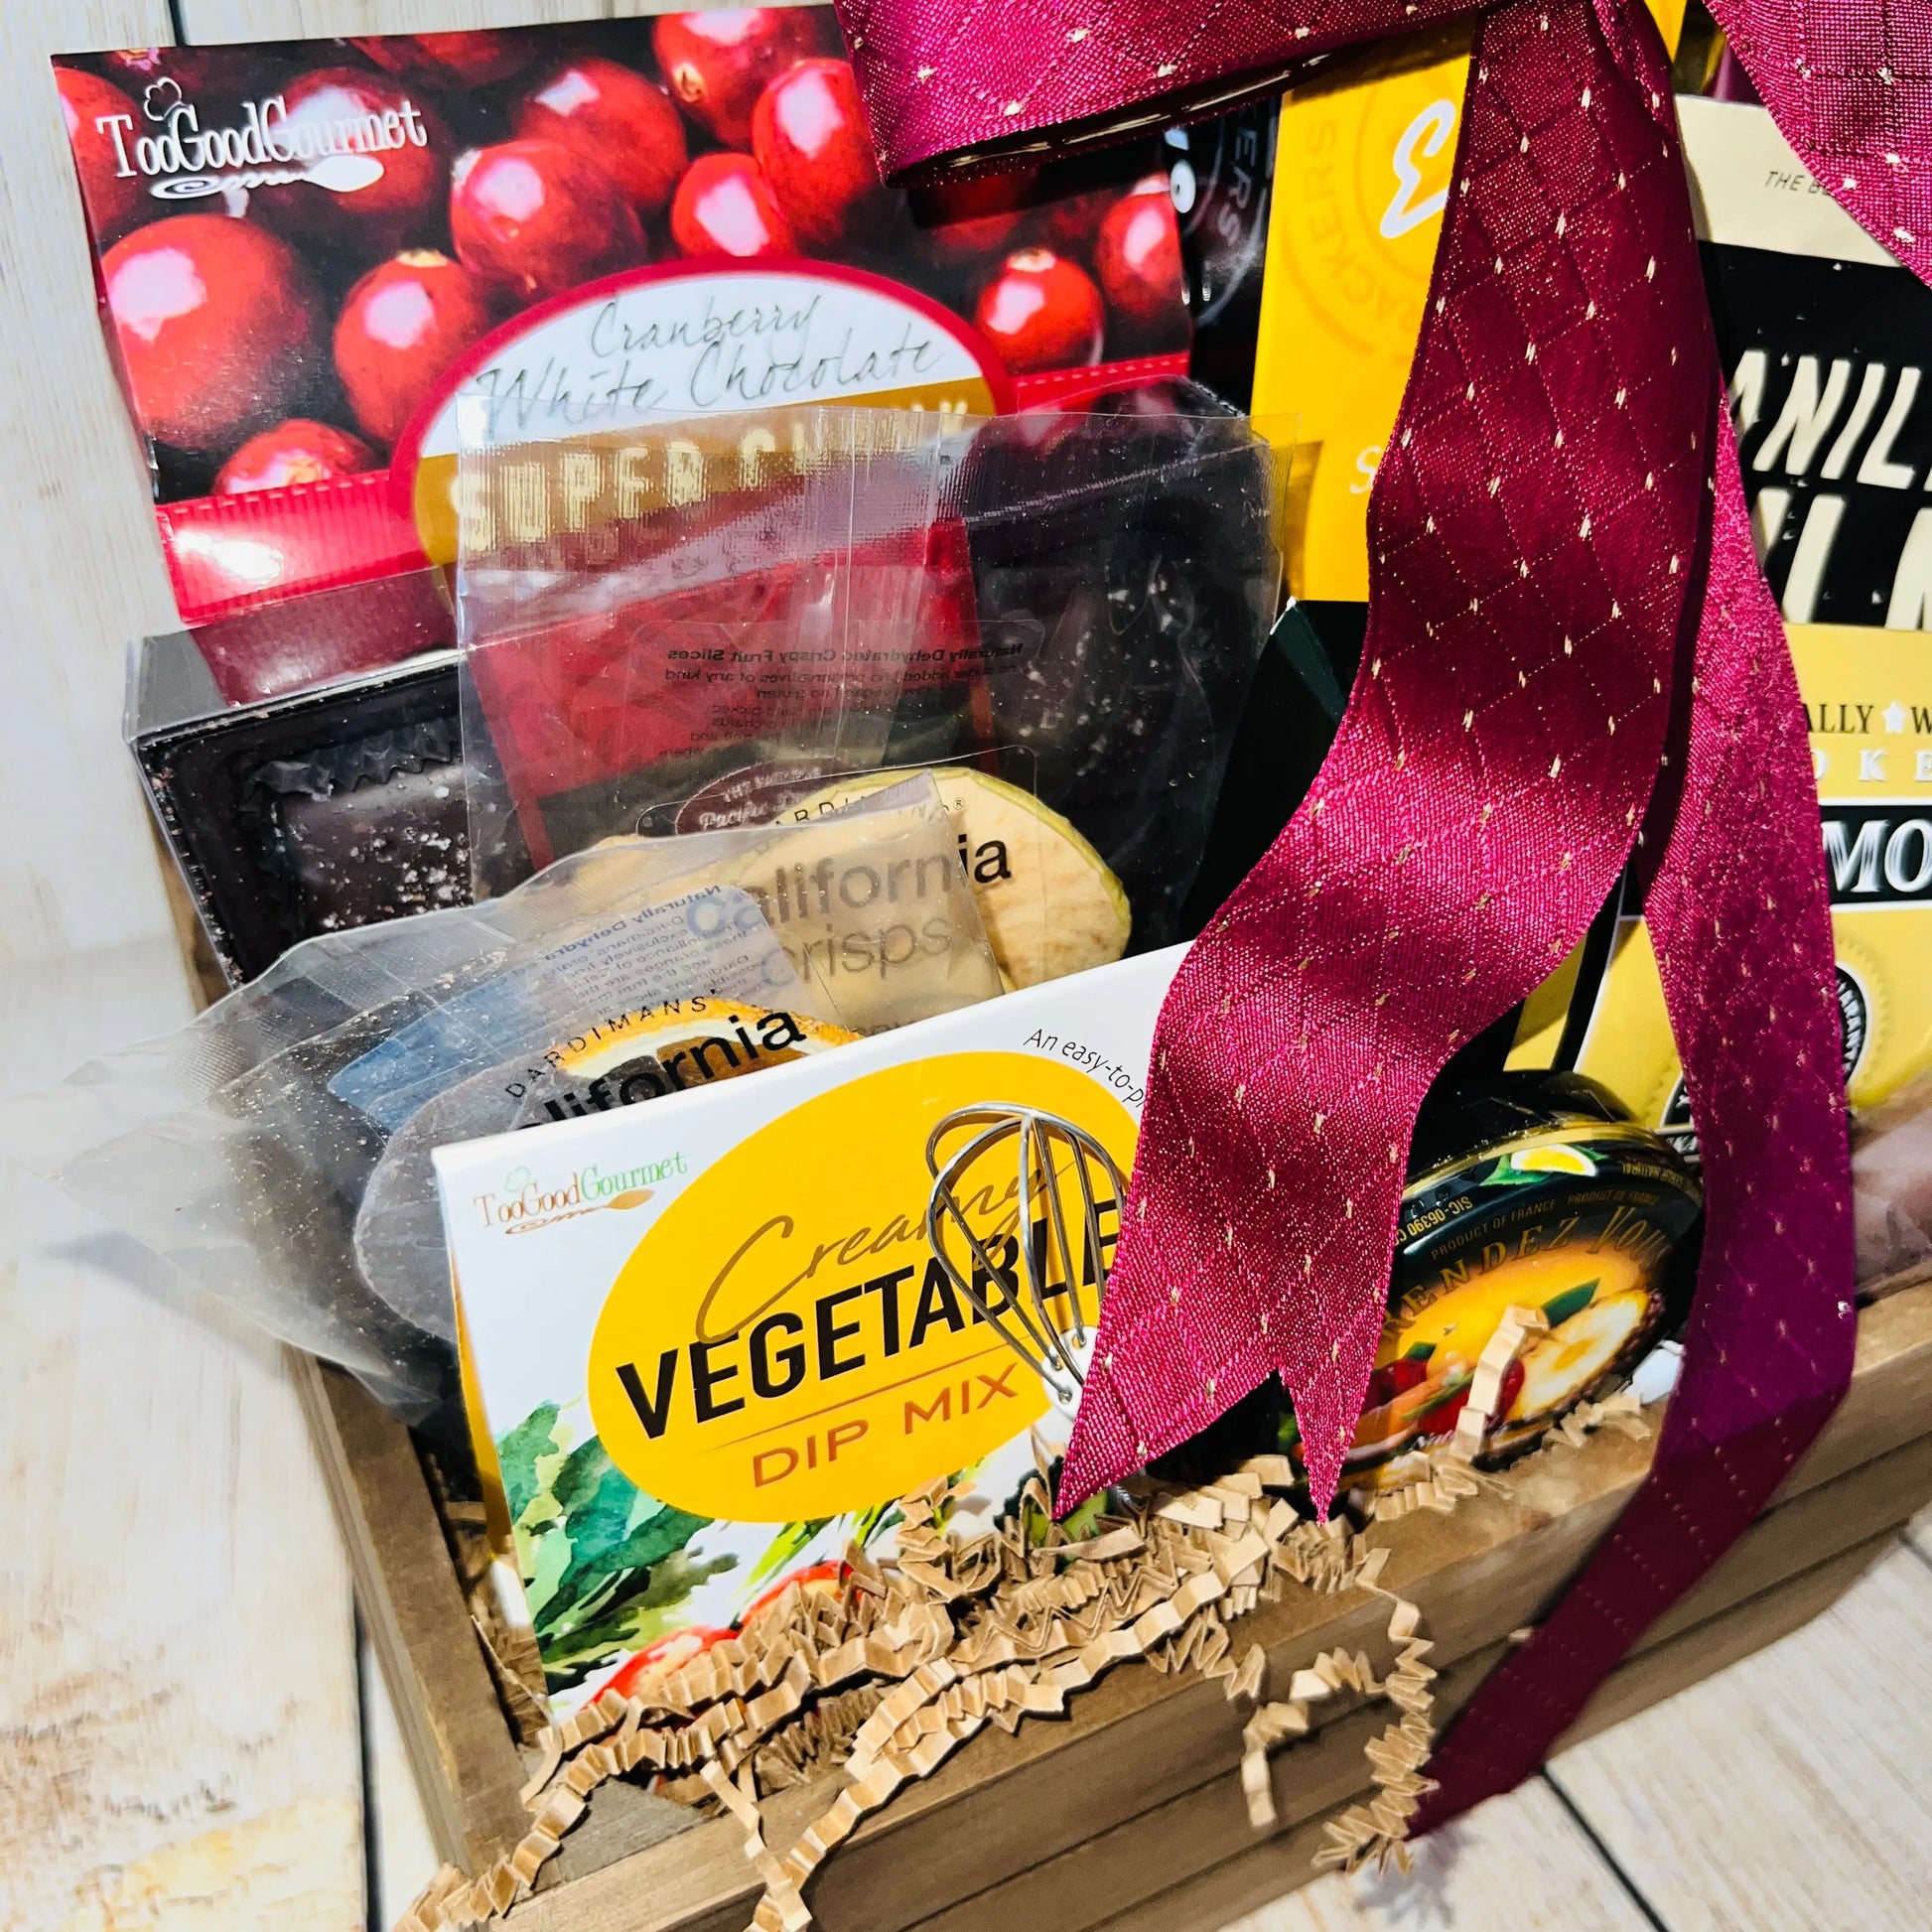 Corporate Gourmet - The Gifted Basket